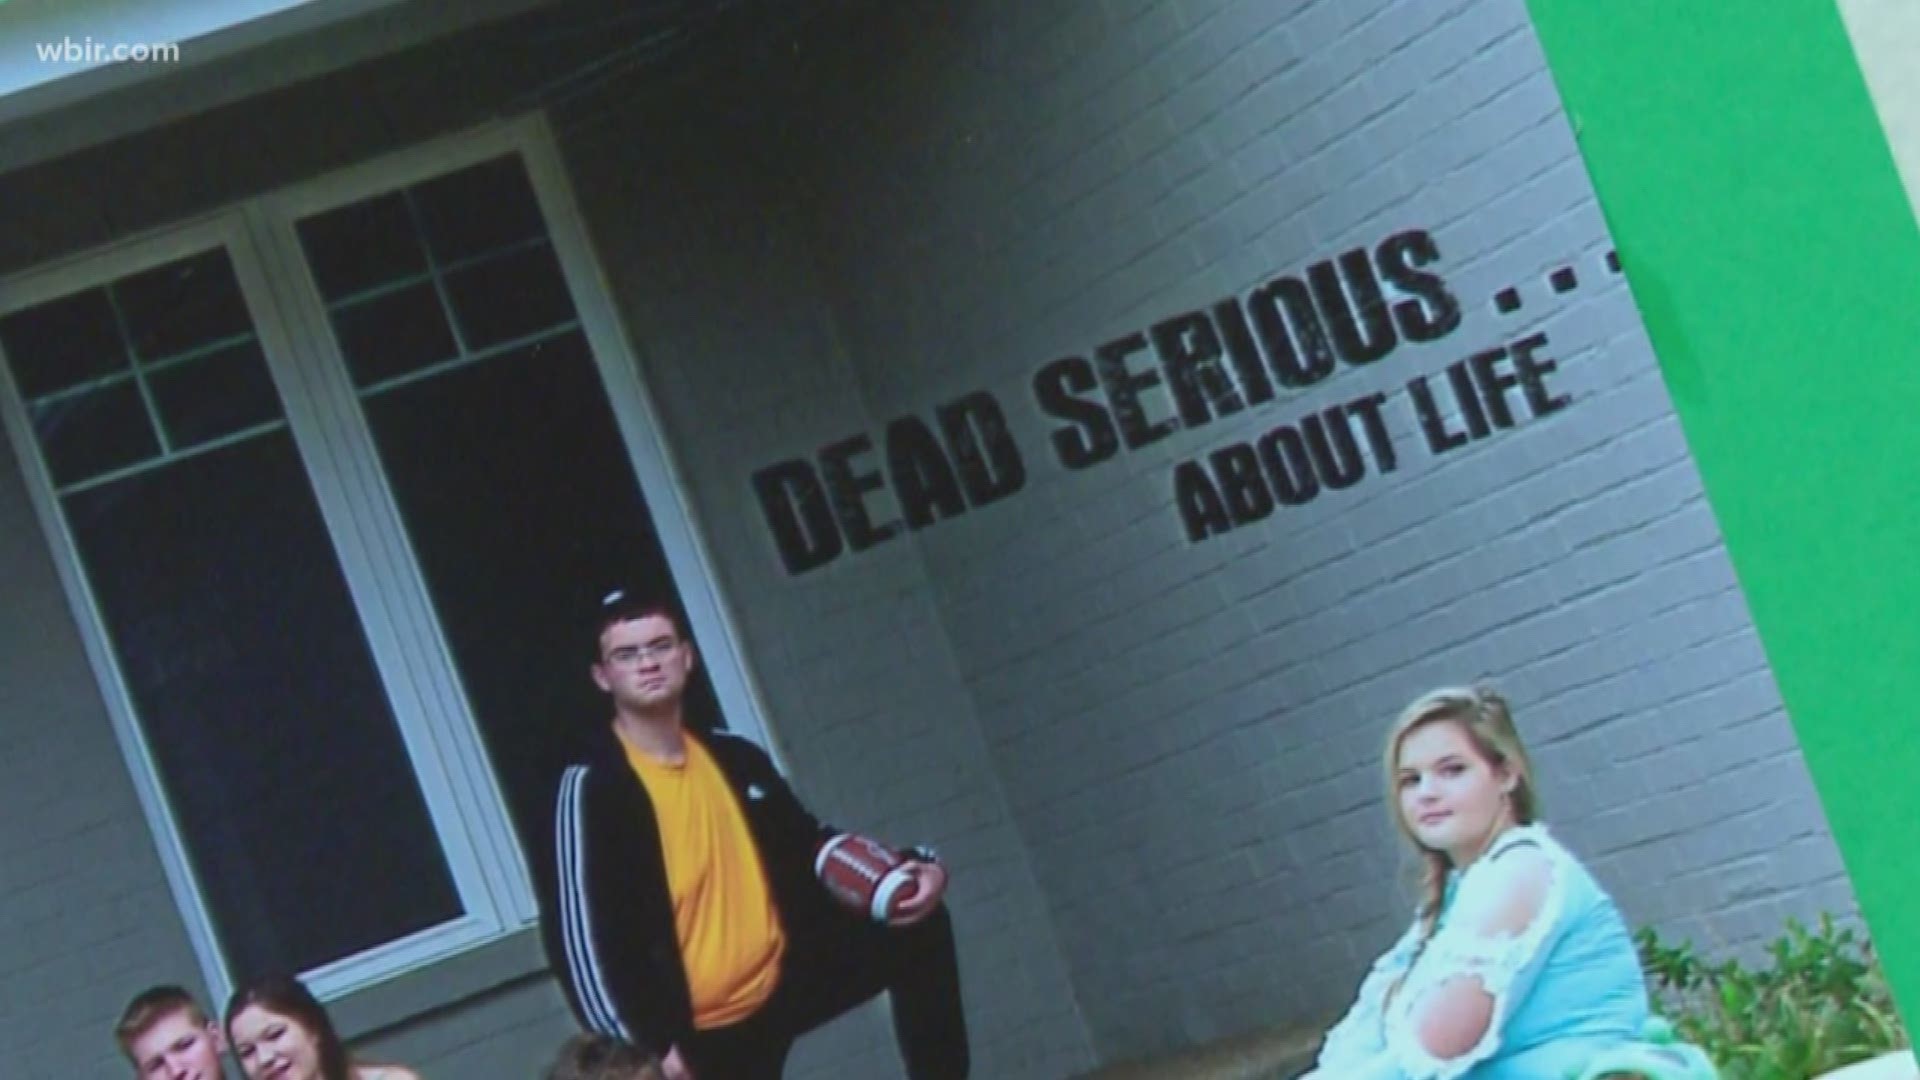 The group is called "Dead Serious...About Life." It travels all over the country performing music and hoping to encourage other teens not to give up.